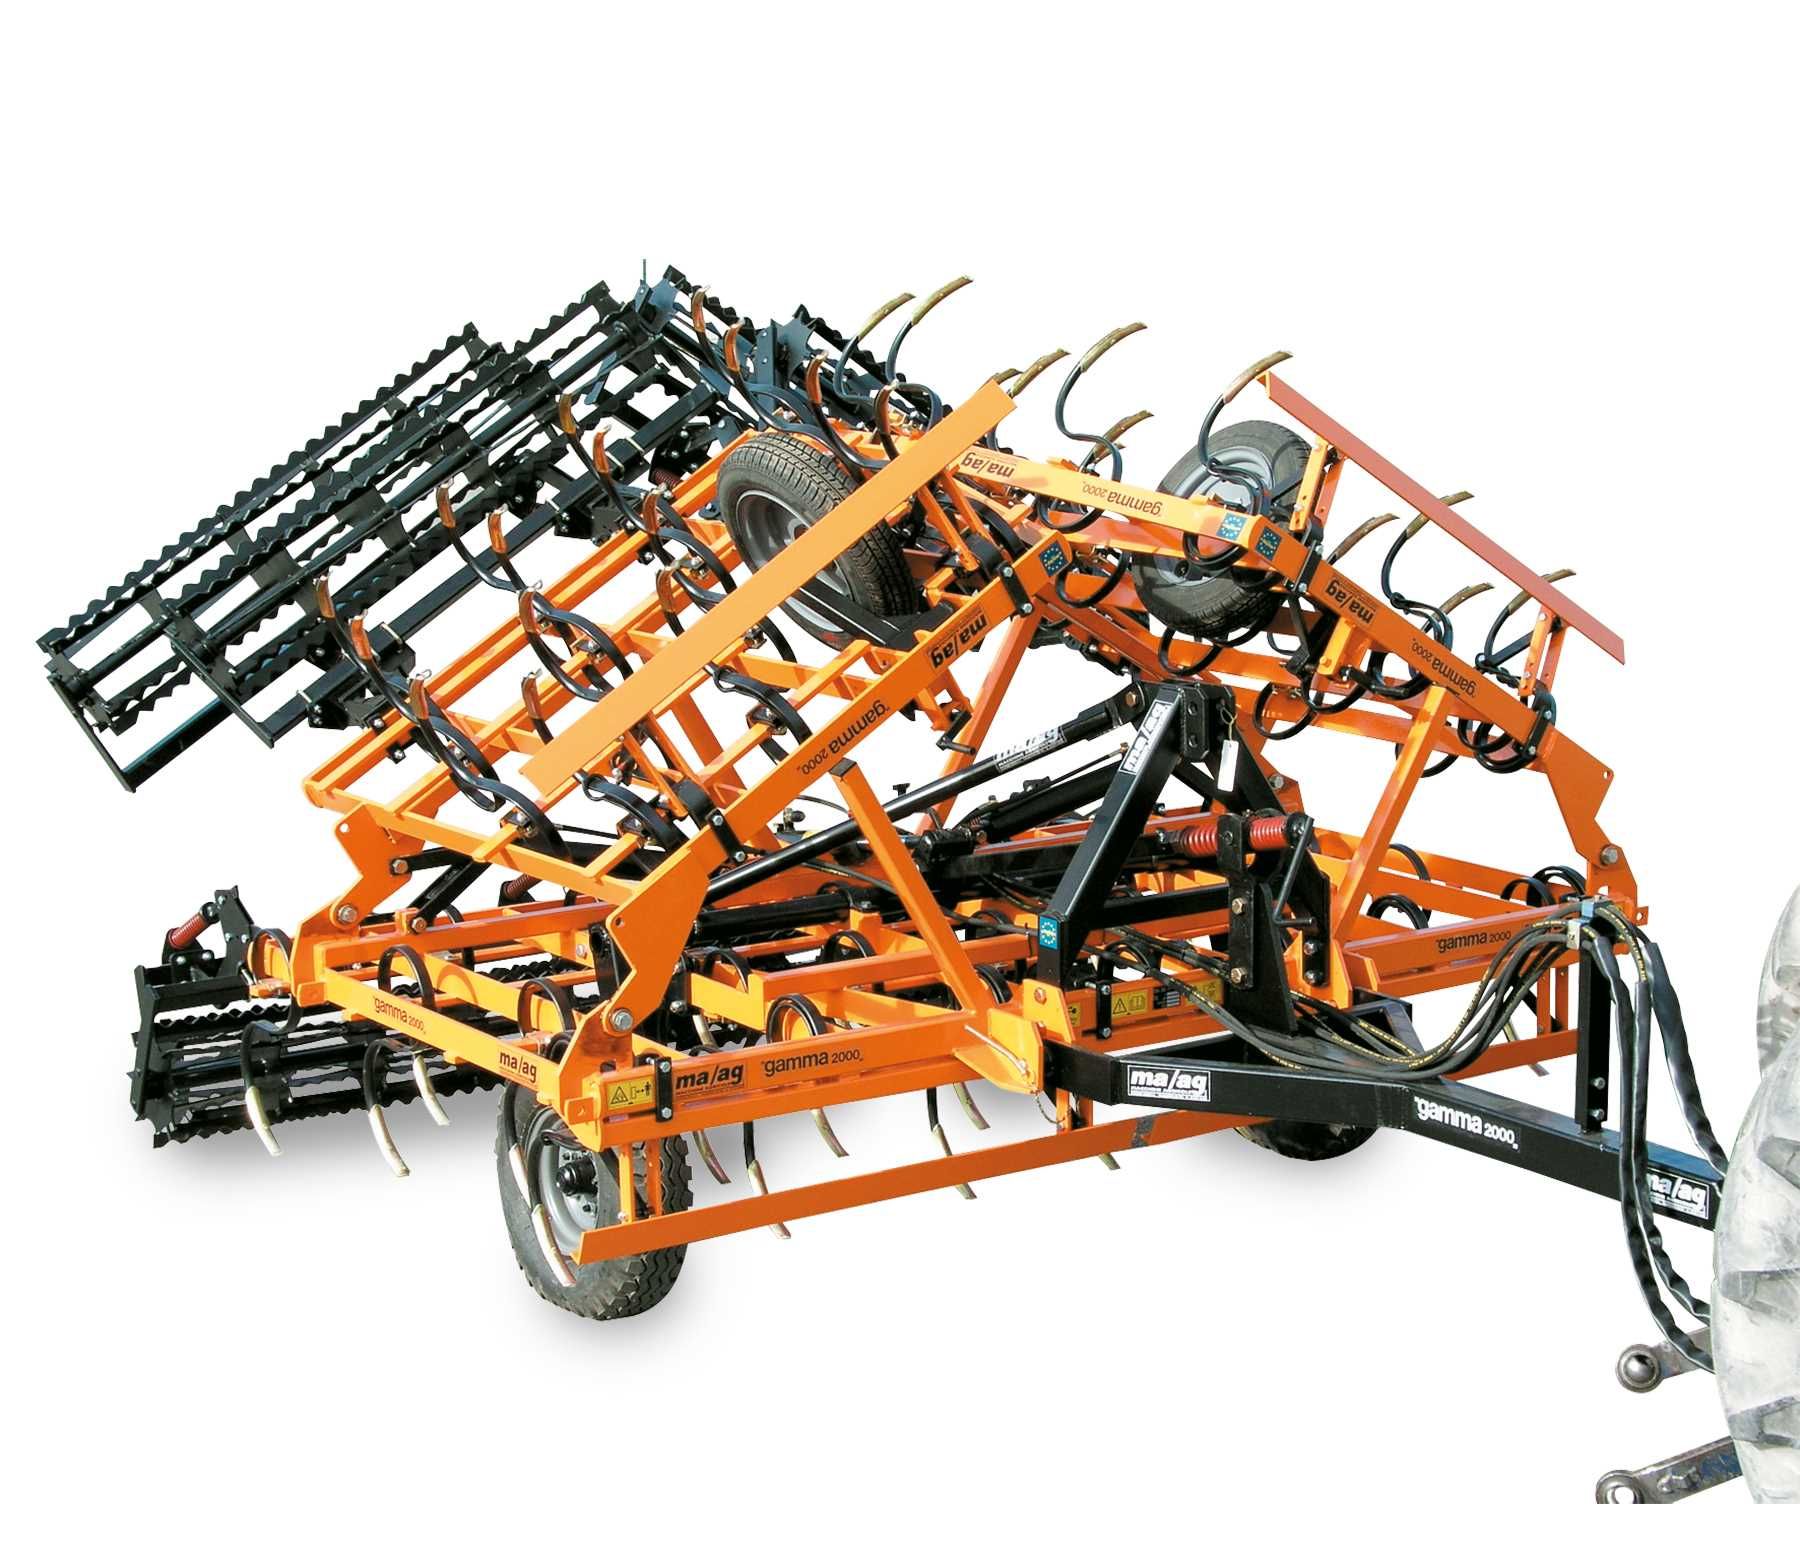 Cultivators and grubbers with springs